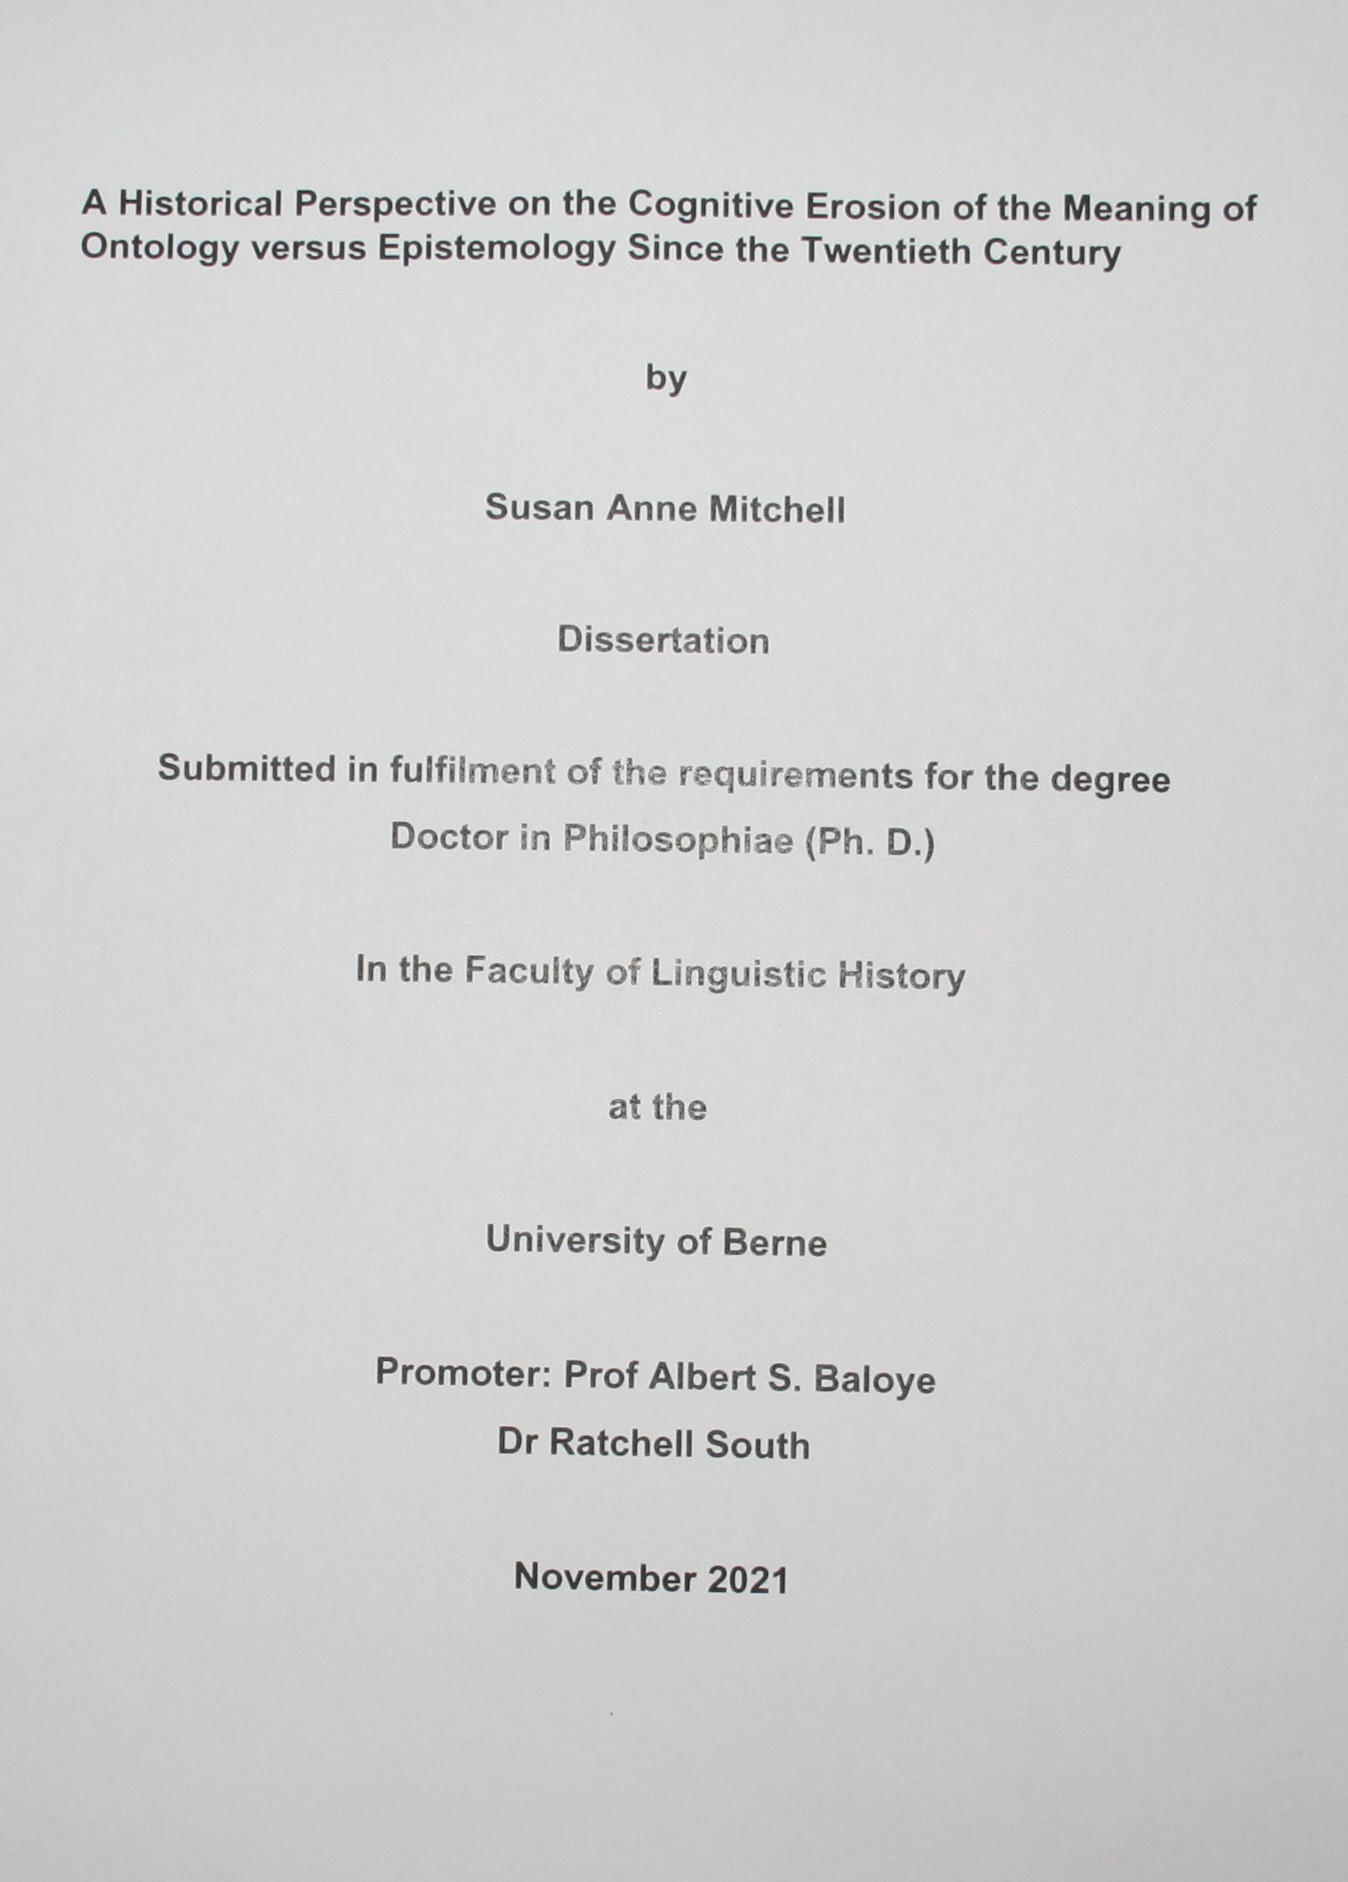 front page of research paper with logo